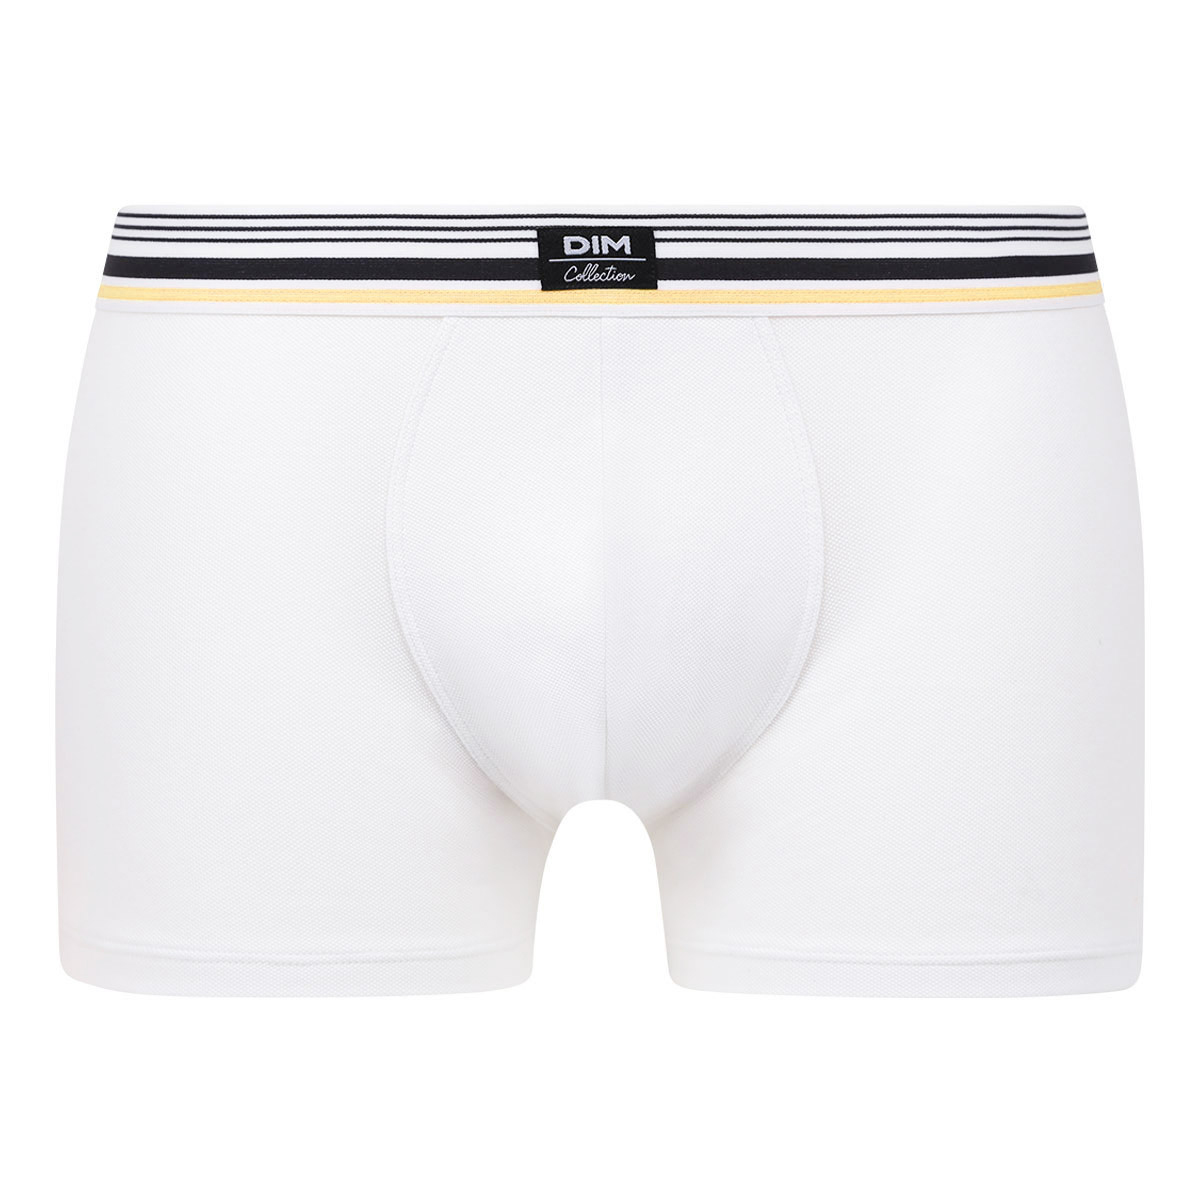 Henner boxer shorts – The White Briefs